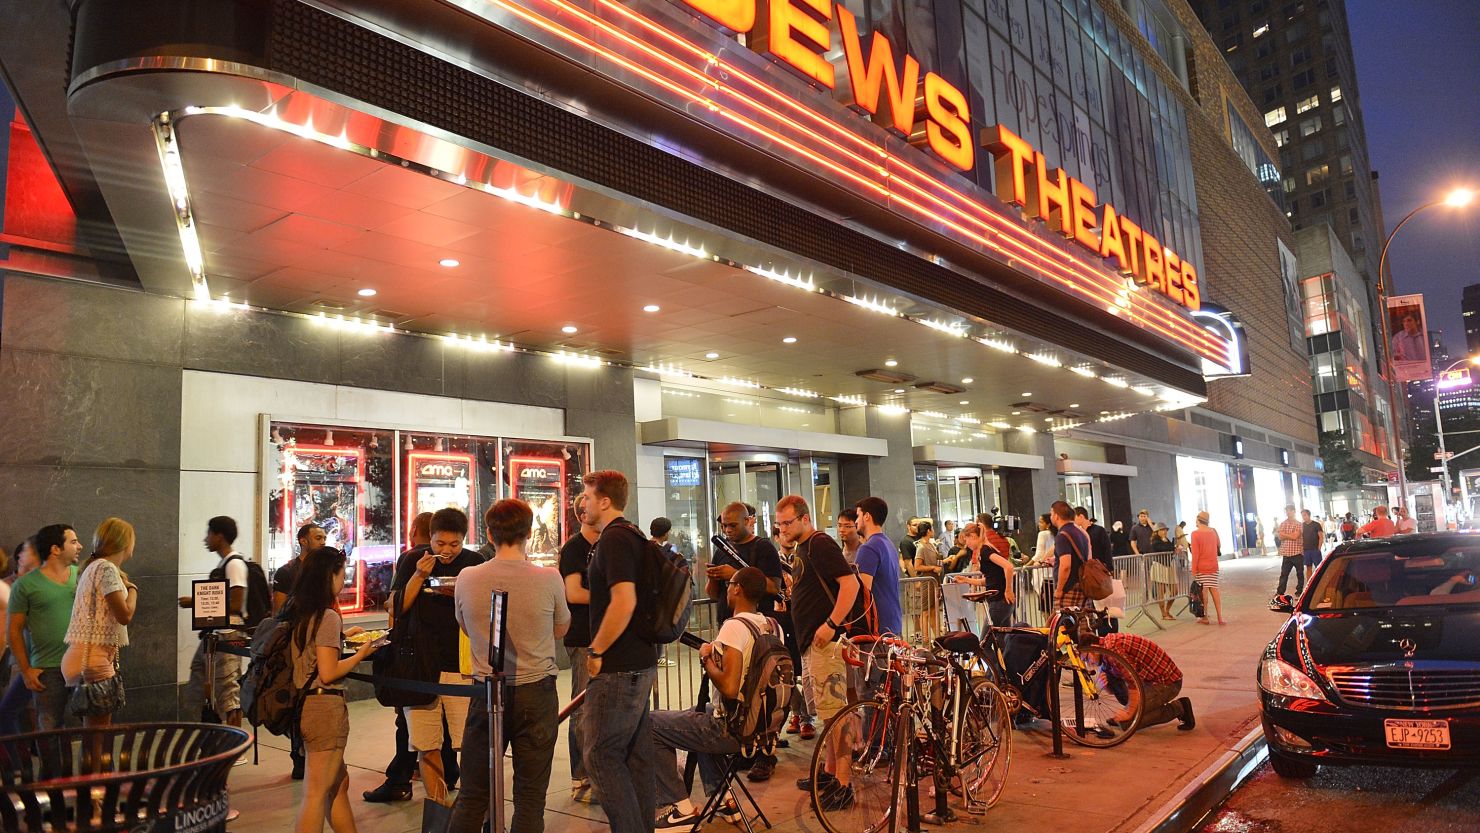 Fans wait outside for "The Dark Knight Rises" midnight premiere in New York.